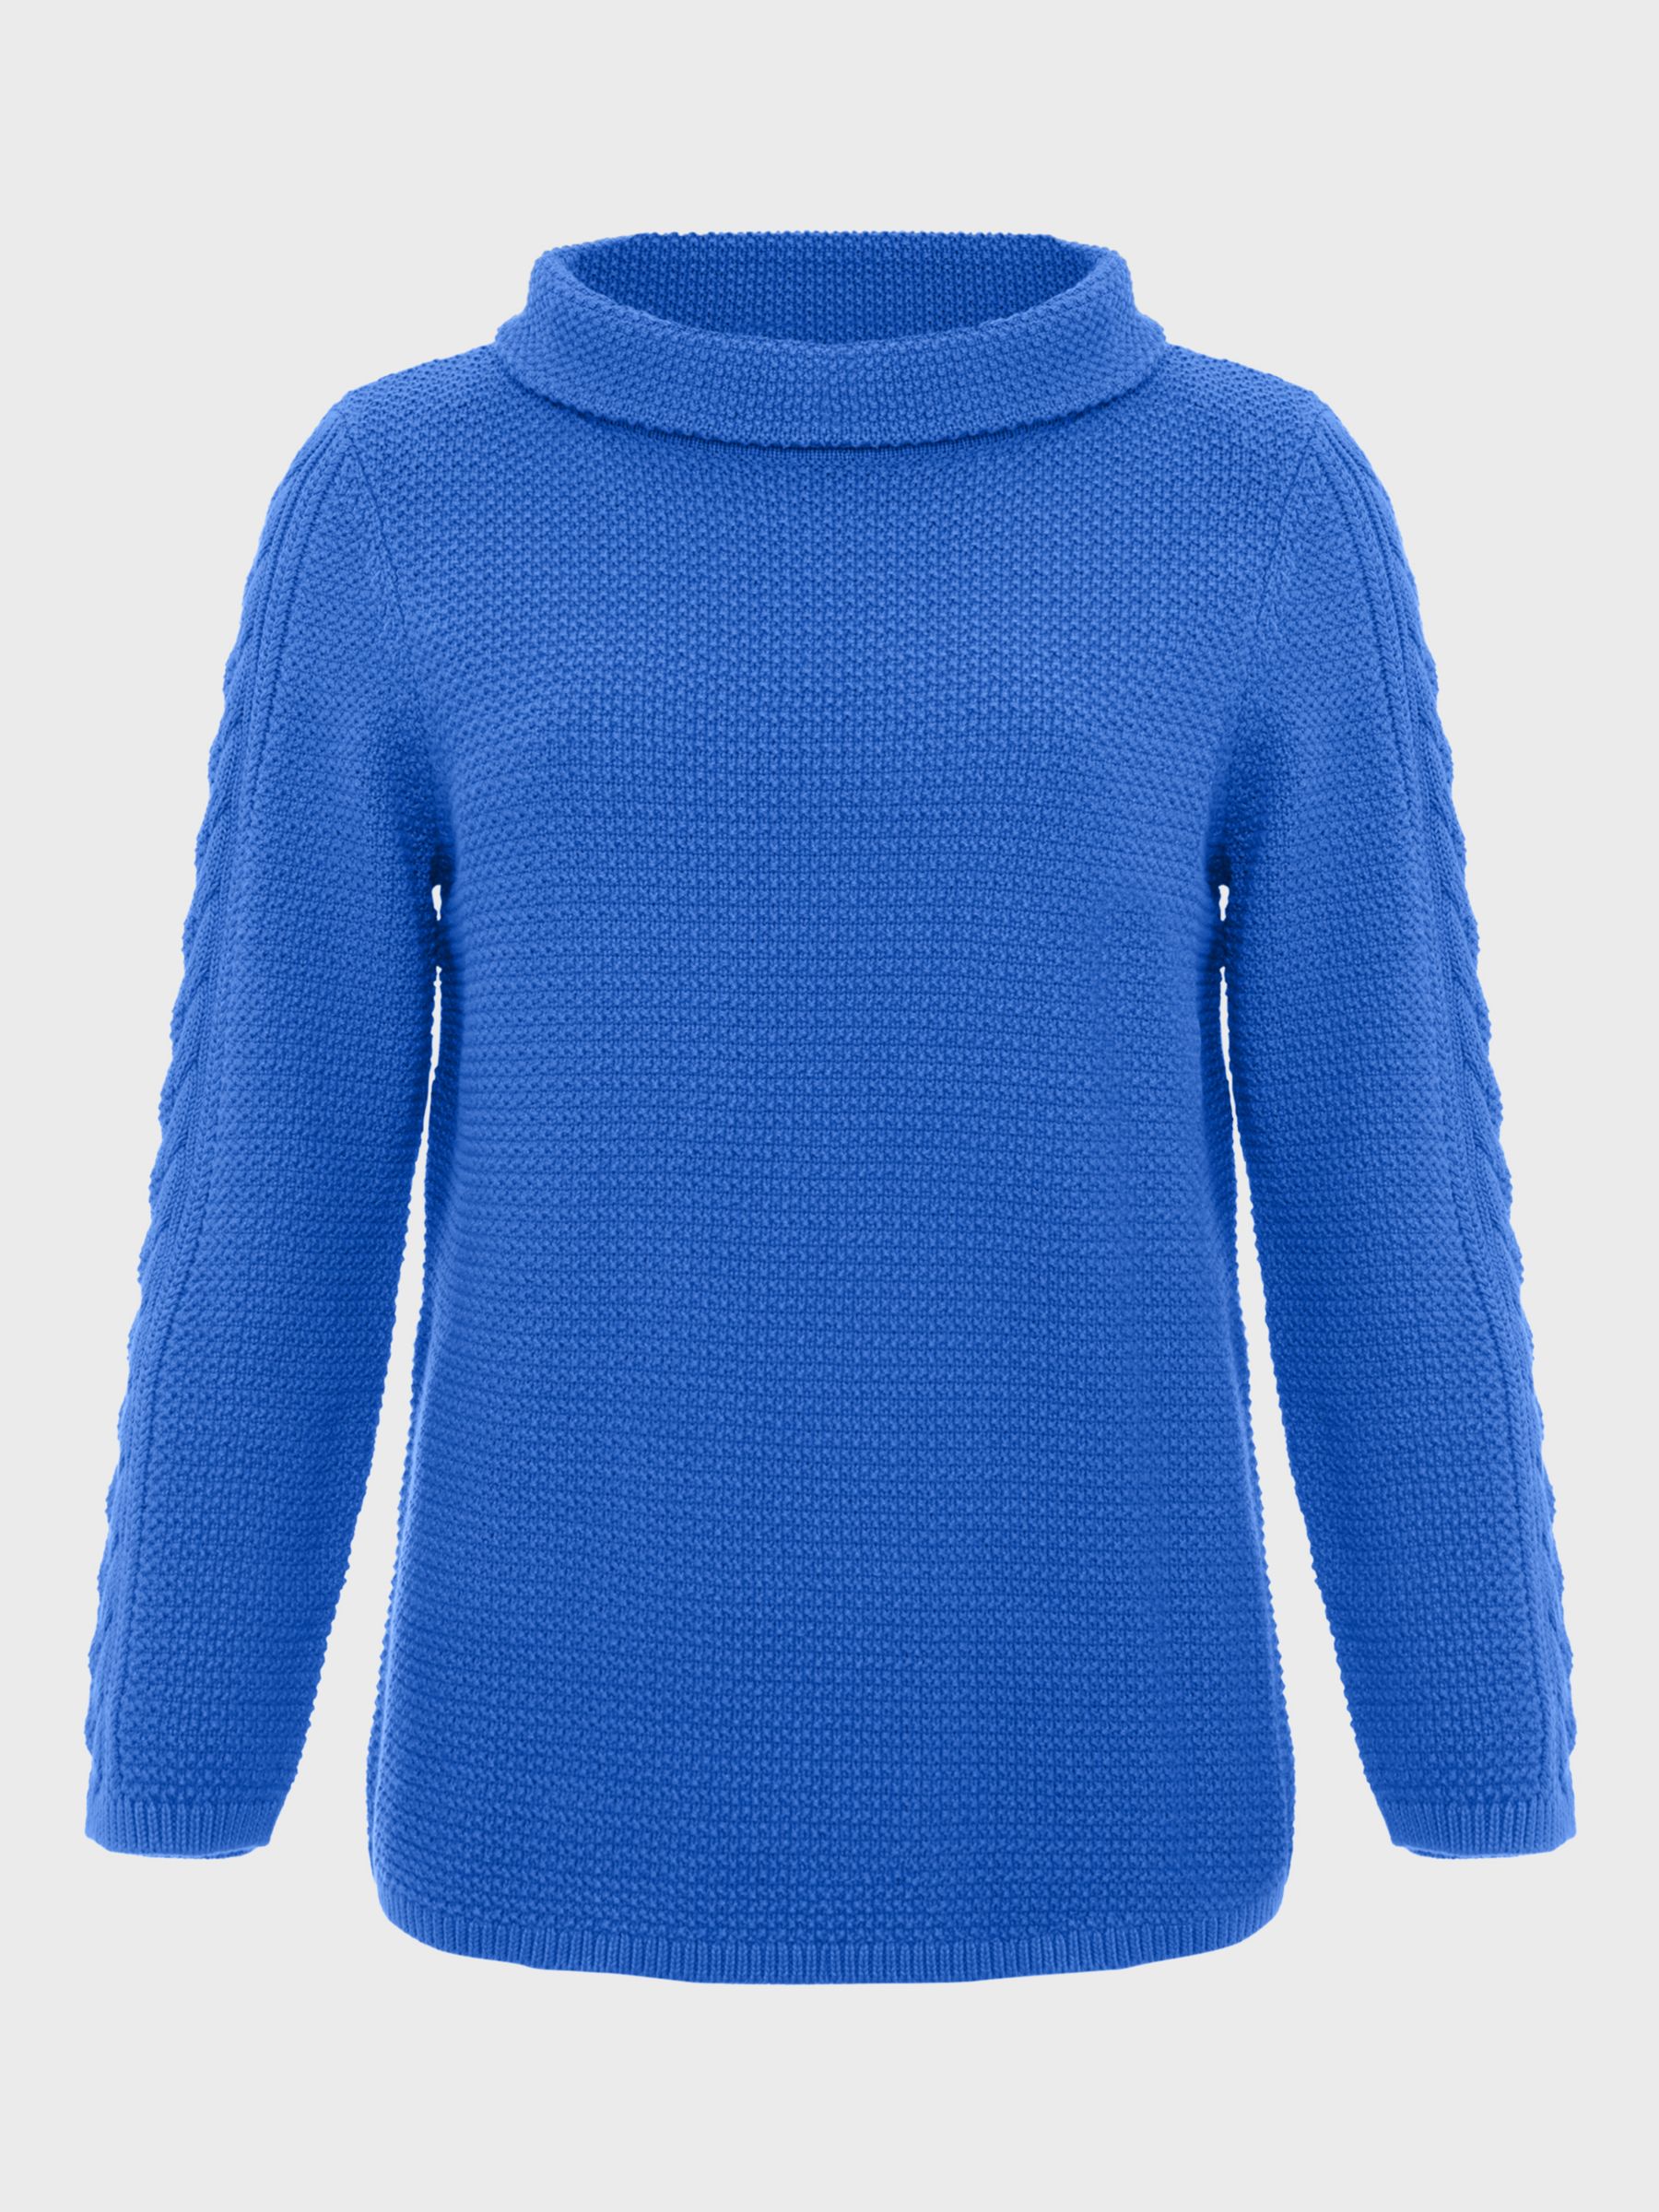 Buy Hobbs Camilla Cable Jumper, Blue Online at johnlewis.com